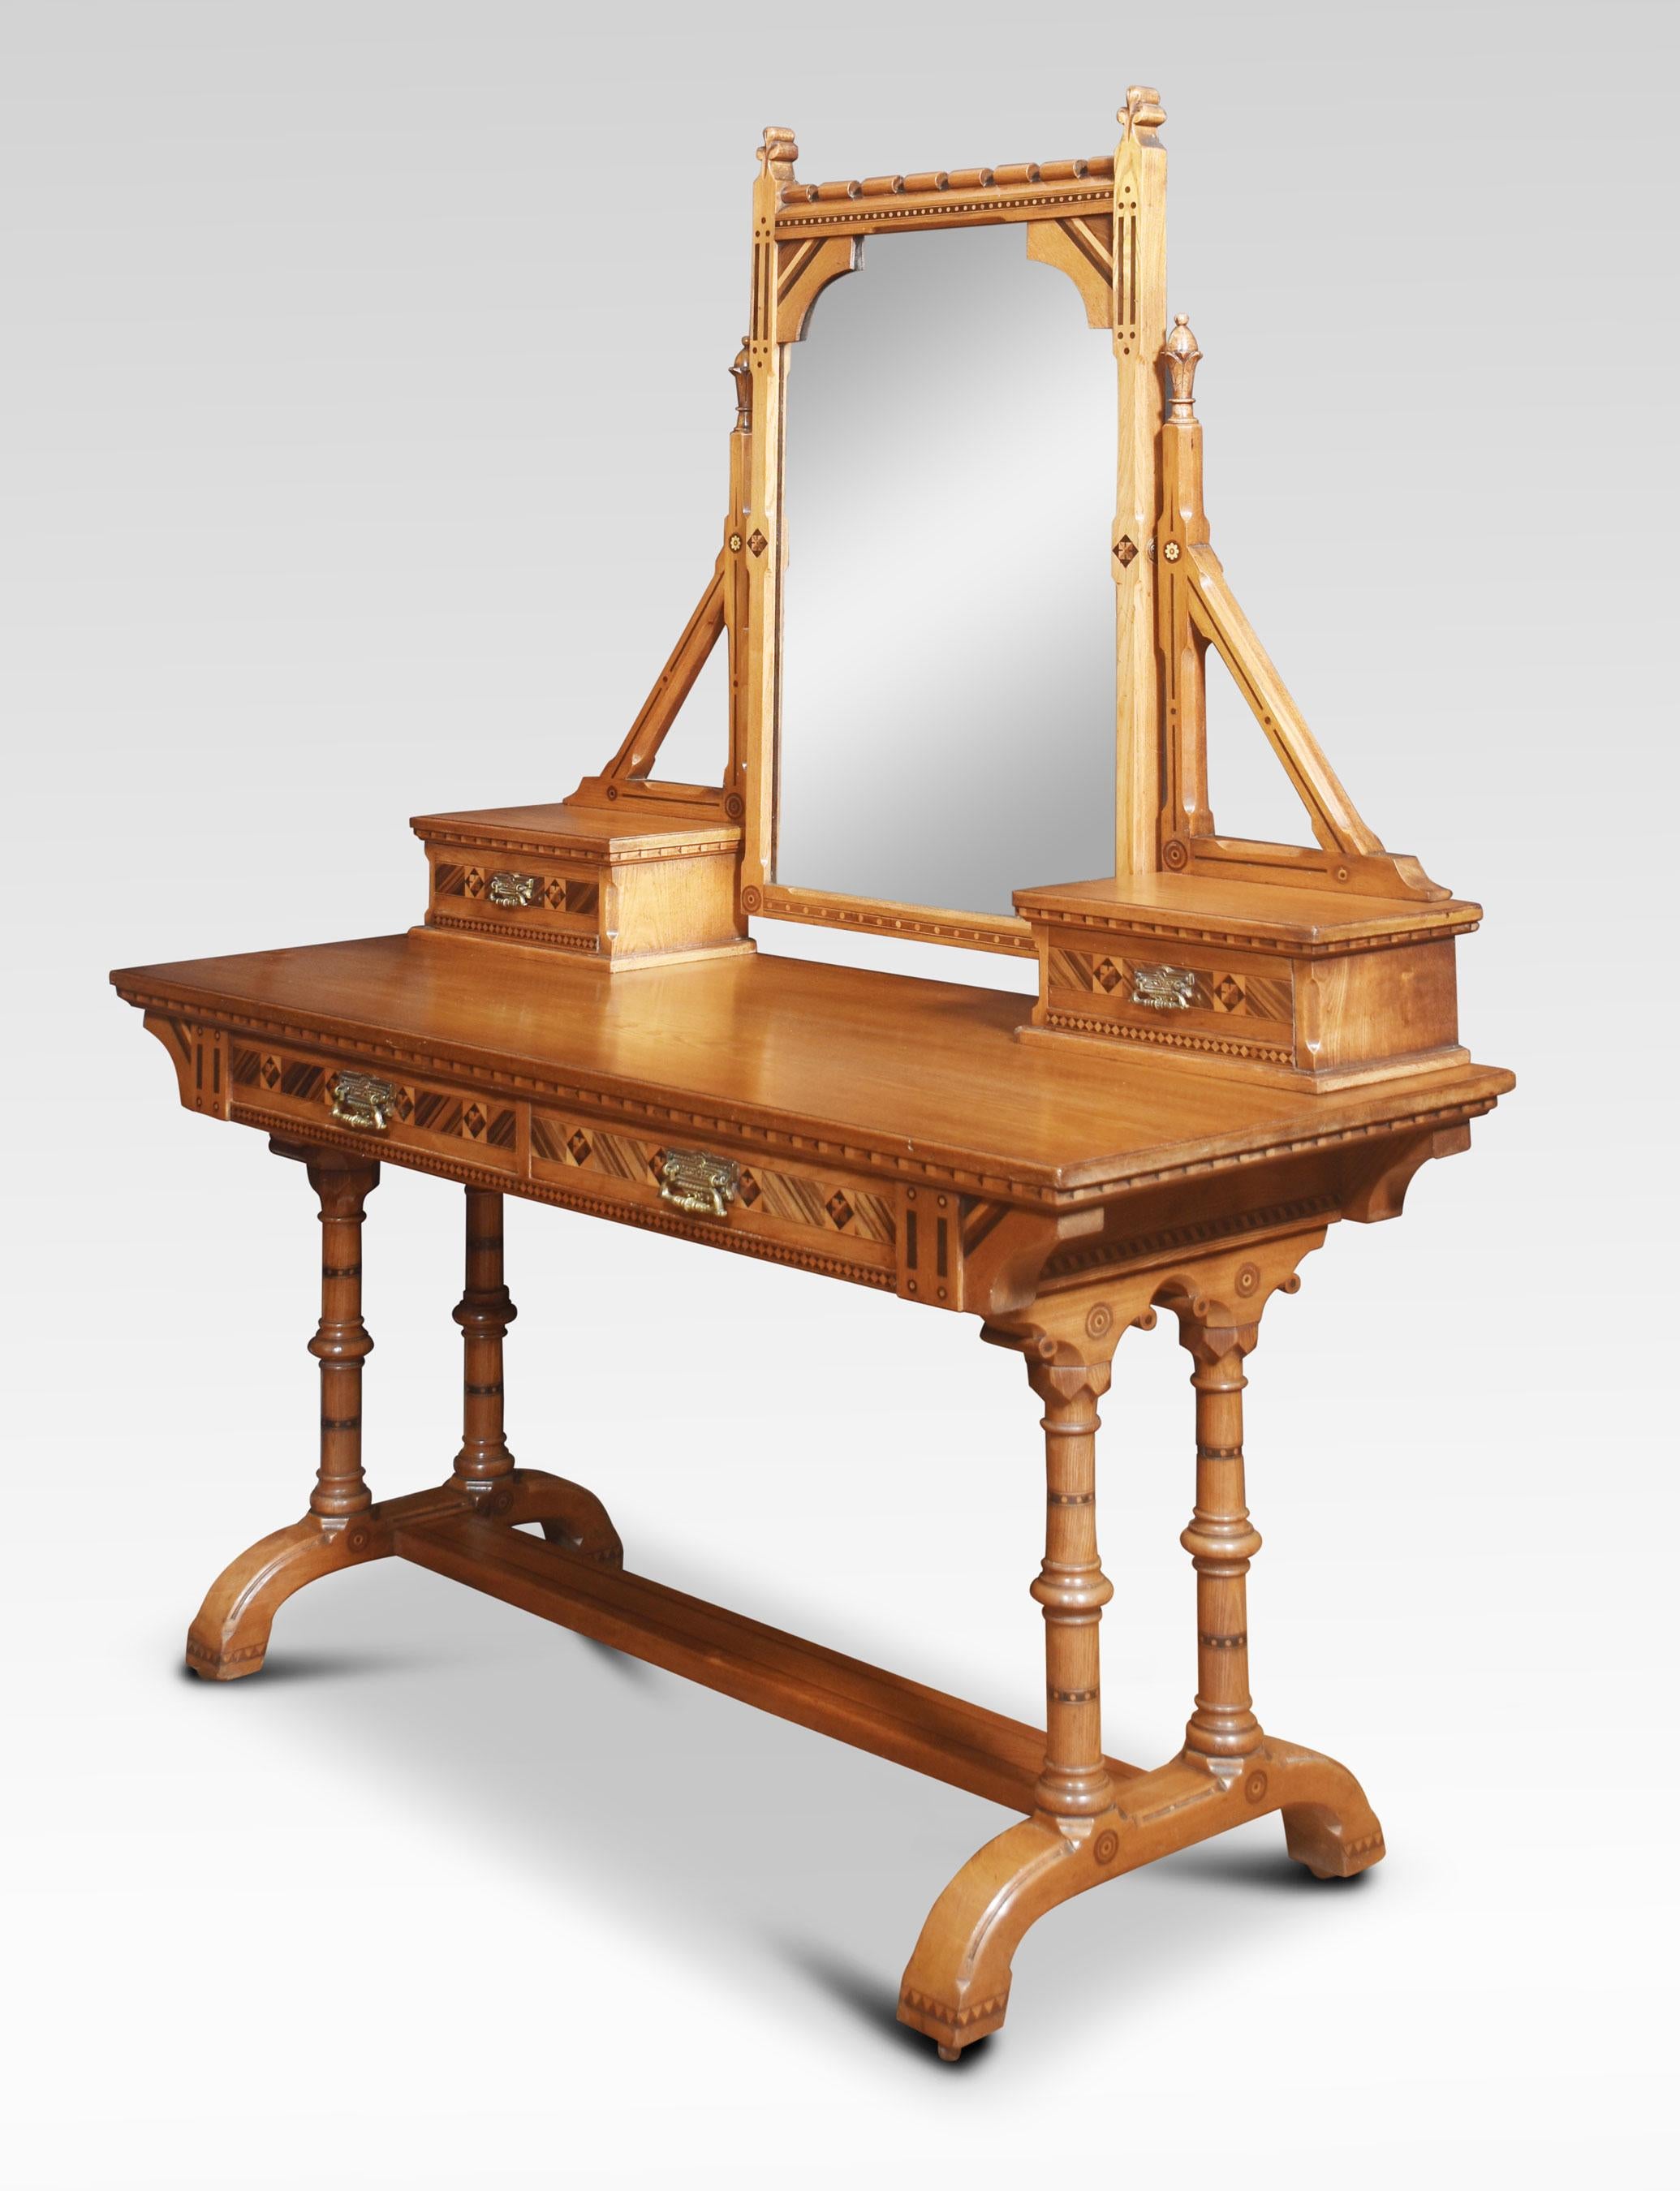 19th Century Aesthetic Movement dressing table For Sale